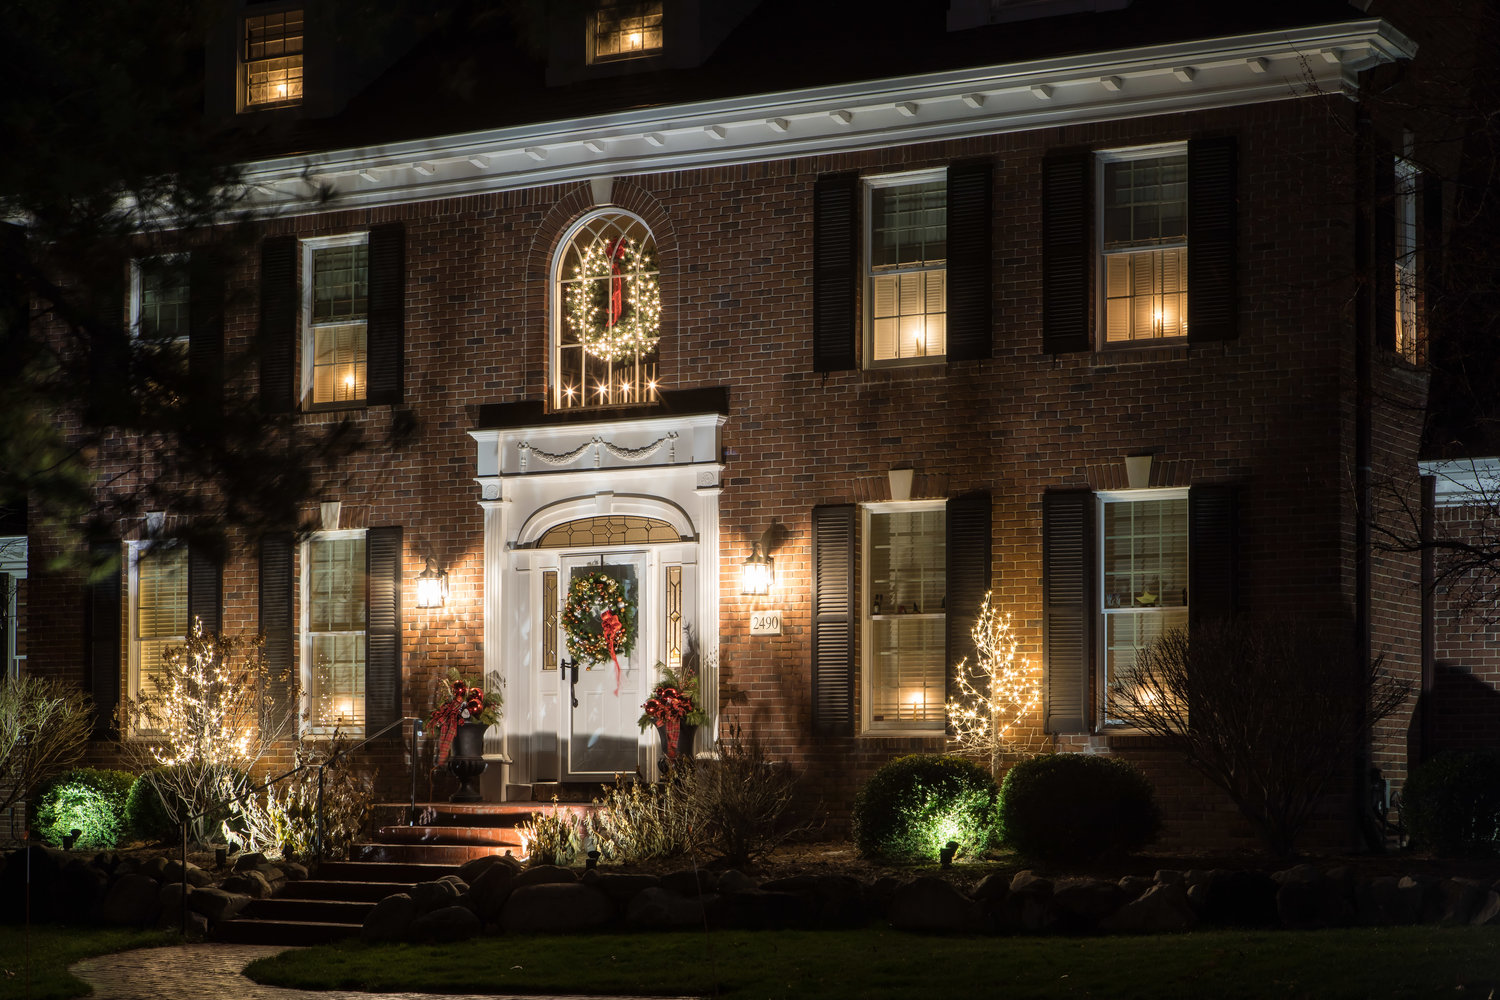 A traditional, understated display is how the James Hallan family captures the spirit of the season on Overglen Court in East Lansing.